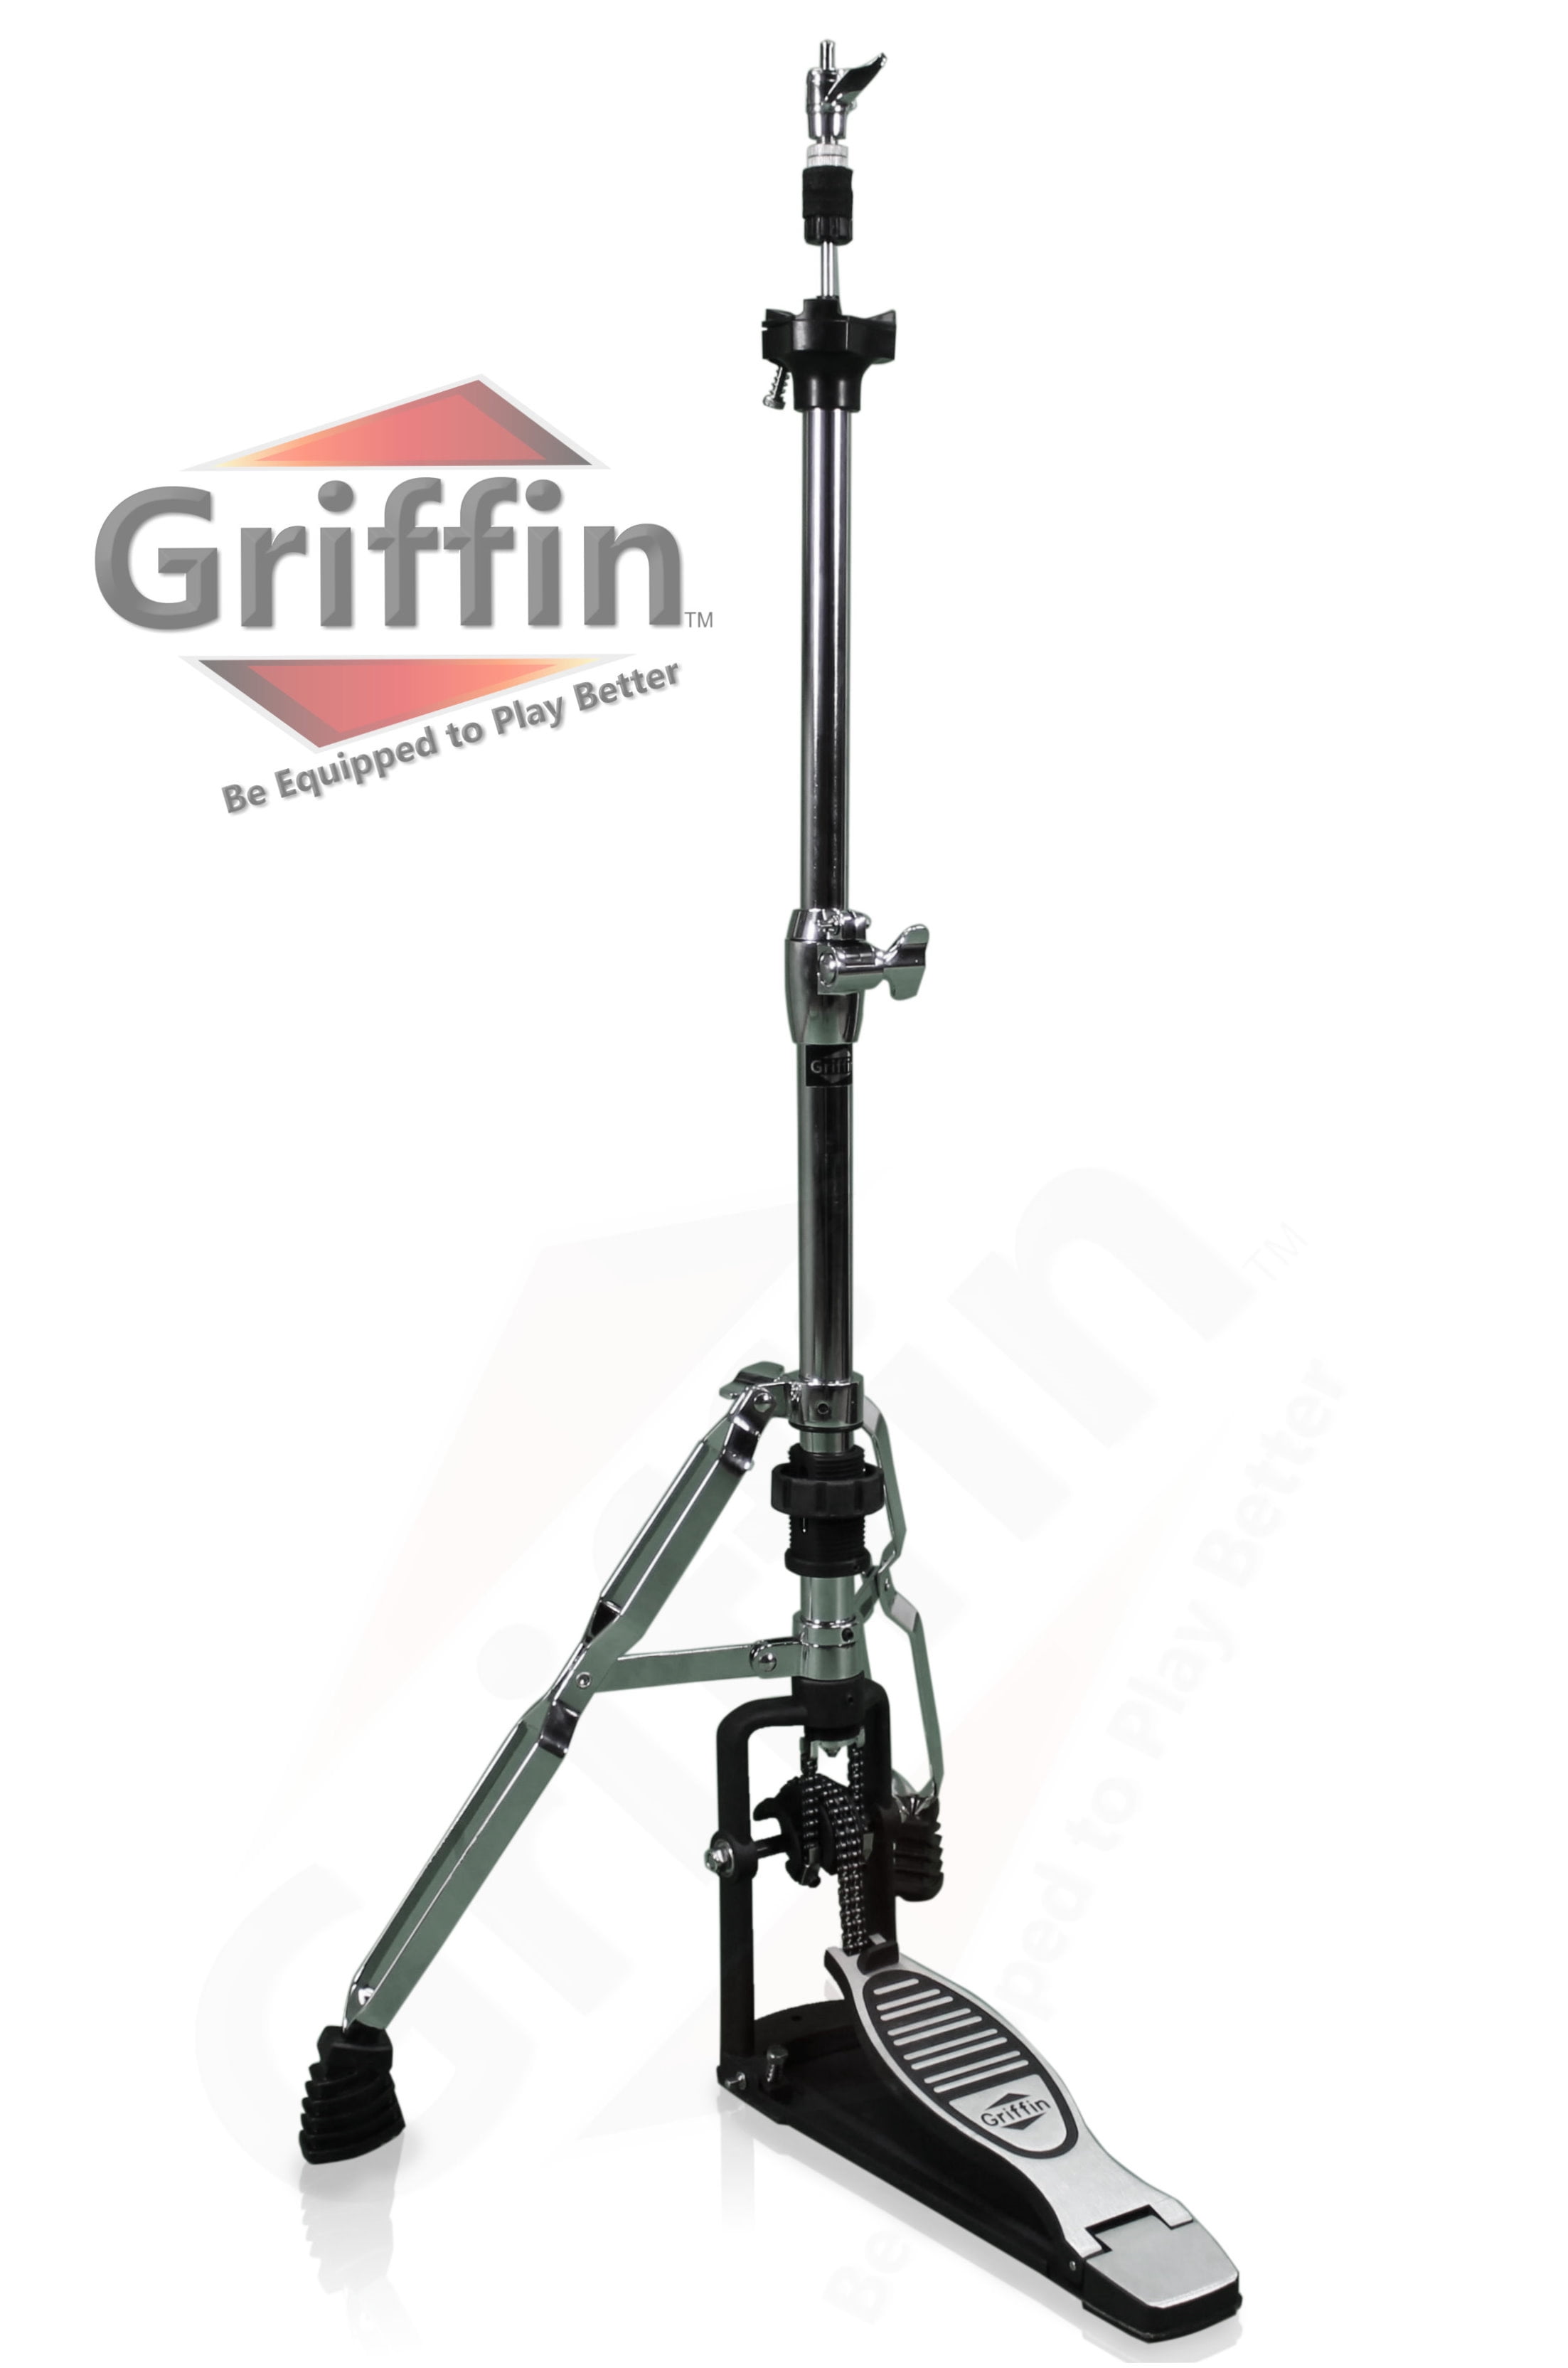 Premium 2 Leg Hi-Hat Stand by Griffin Heavy Duty Hihat Cymbal Foot Pedal with Drum Key Double Braced Chrome Percussion Hardware Mount Folding Two Leg Style Converts to a No Leg High Hat Mount 